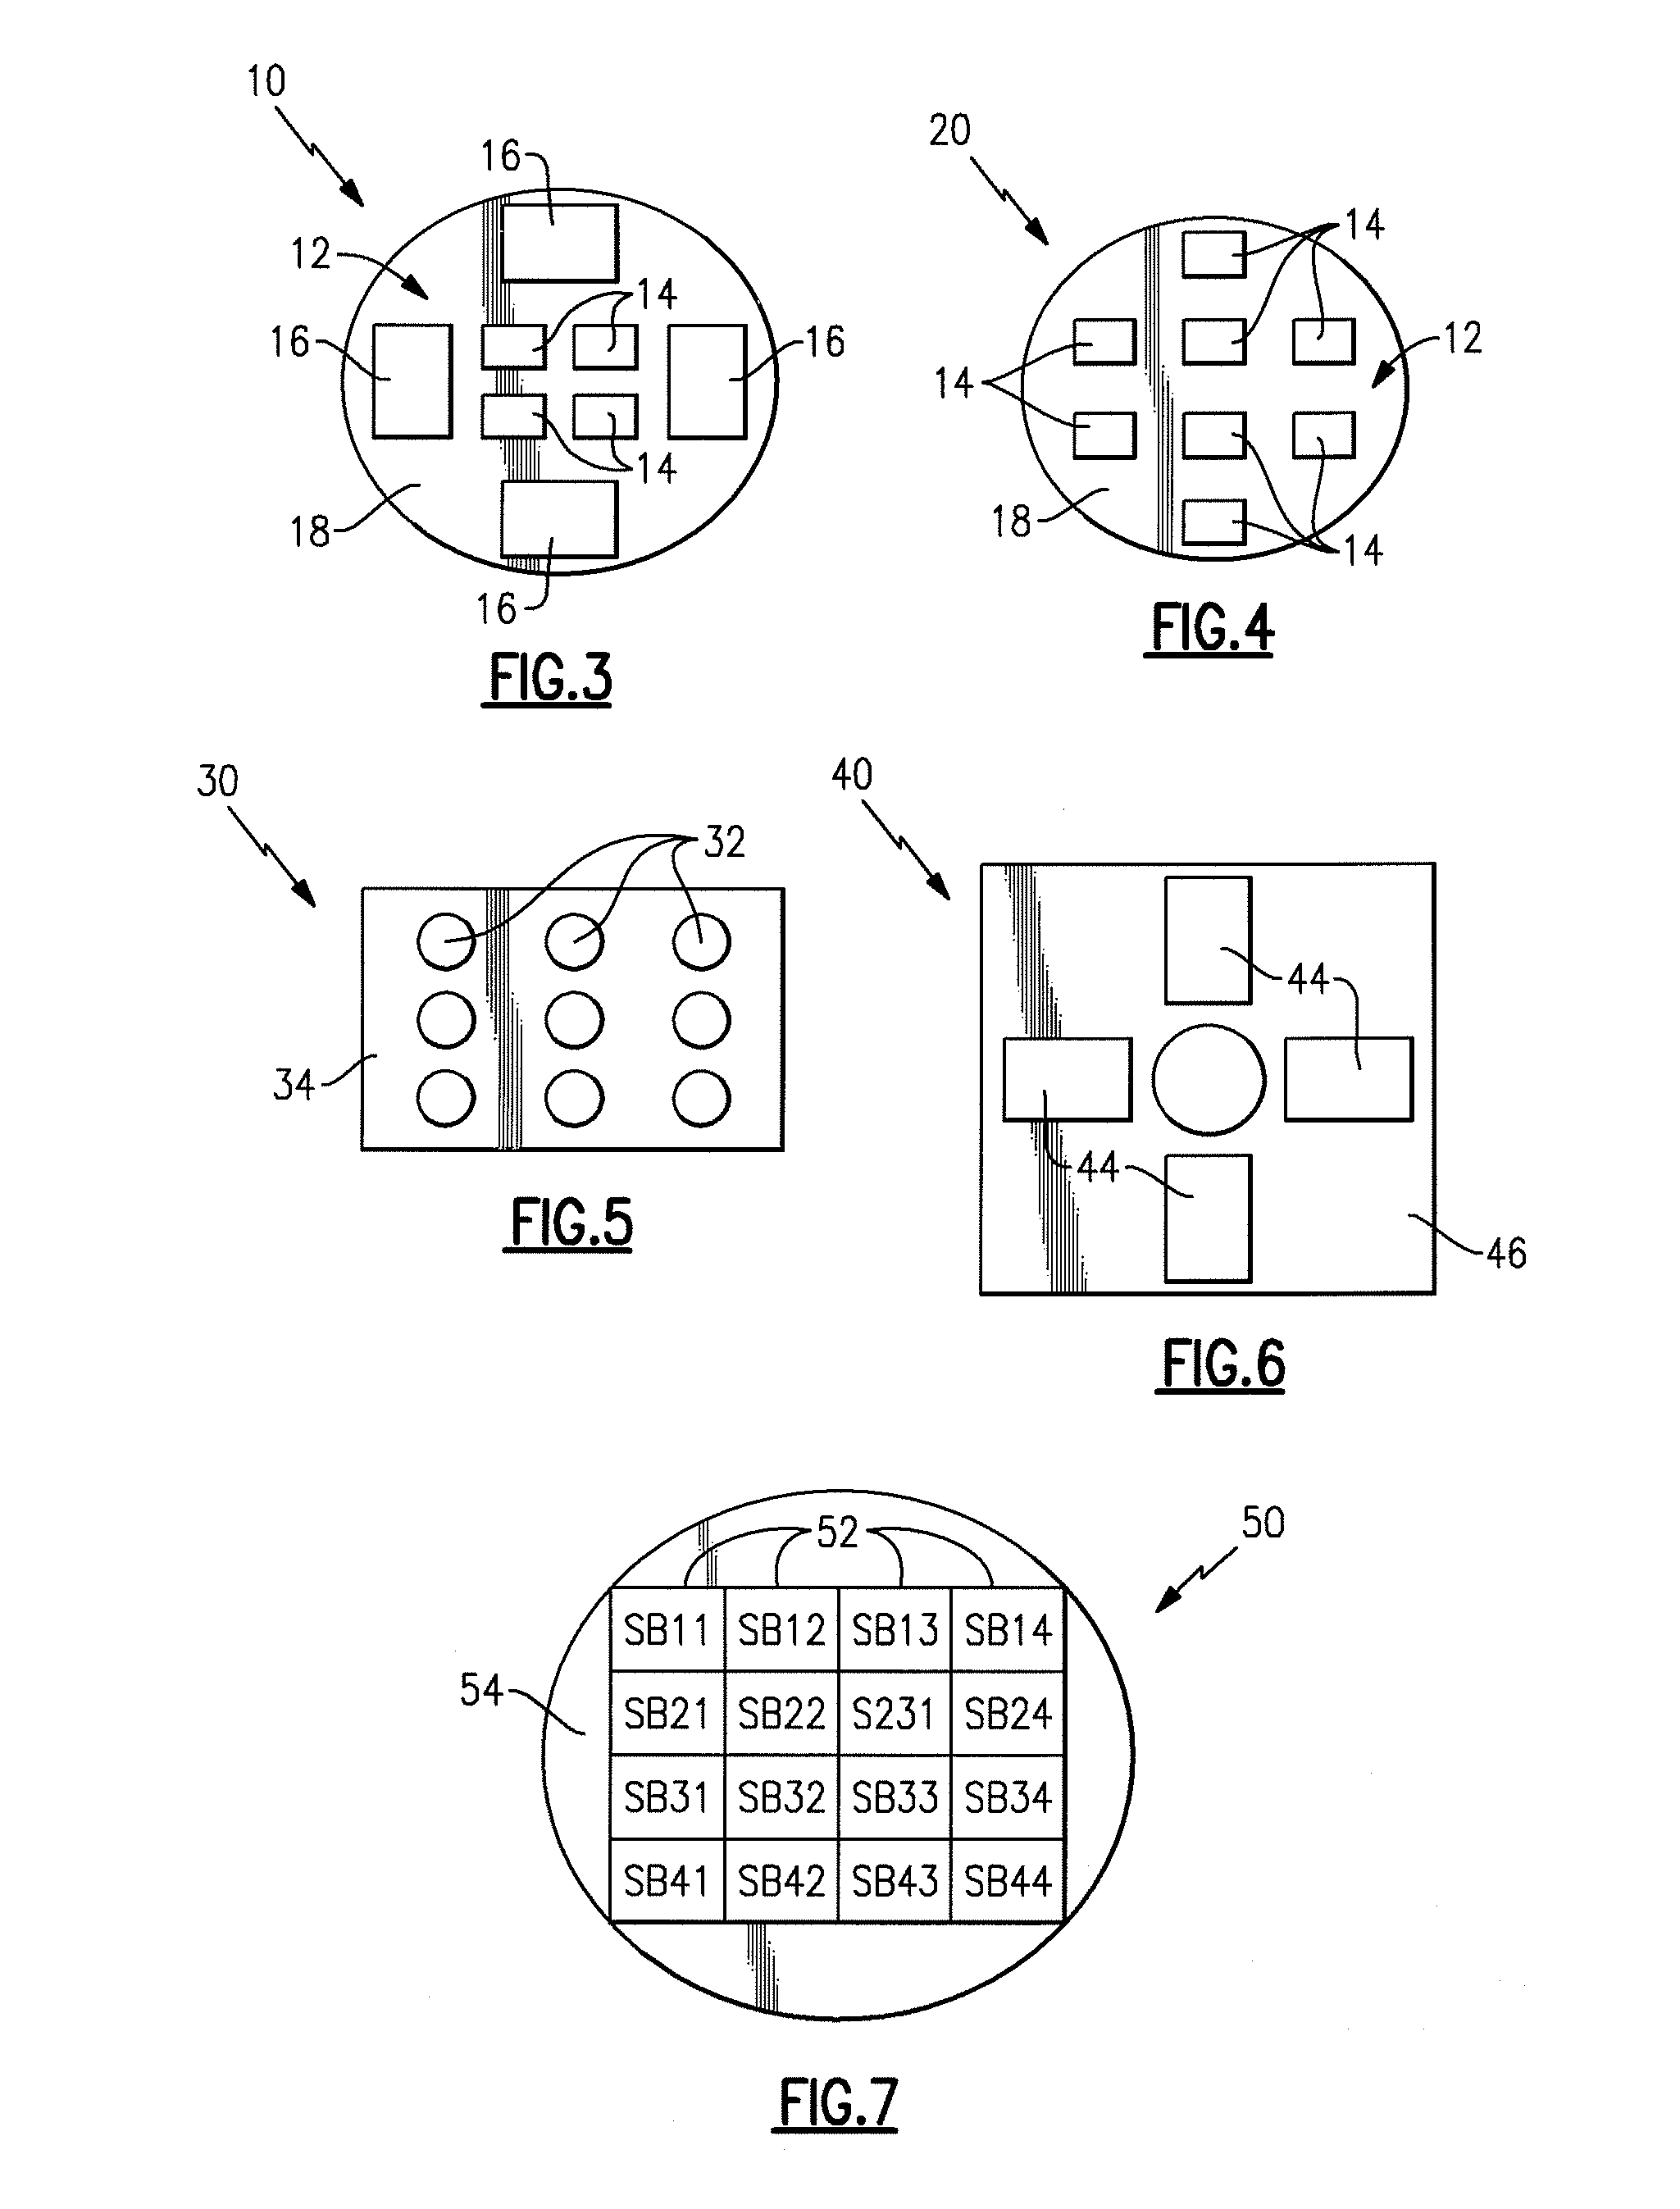 Addressable Matrices/Cluster Blanks for Dental CAD/CAM Systems and Optimization Thereof